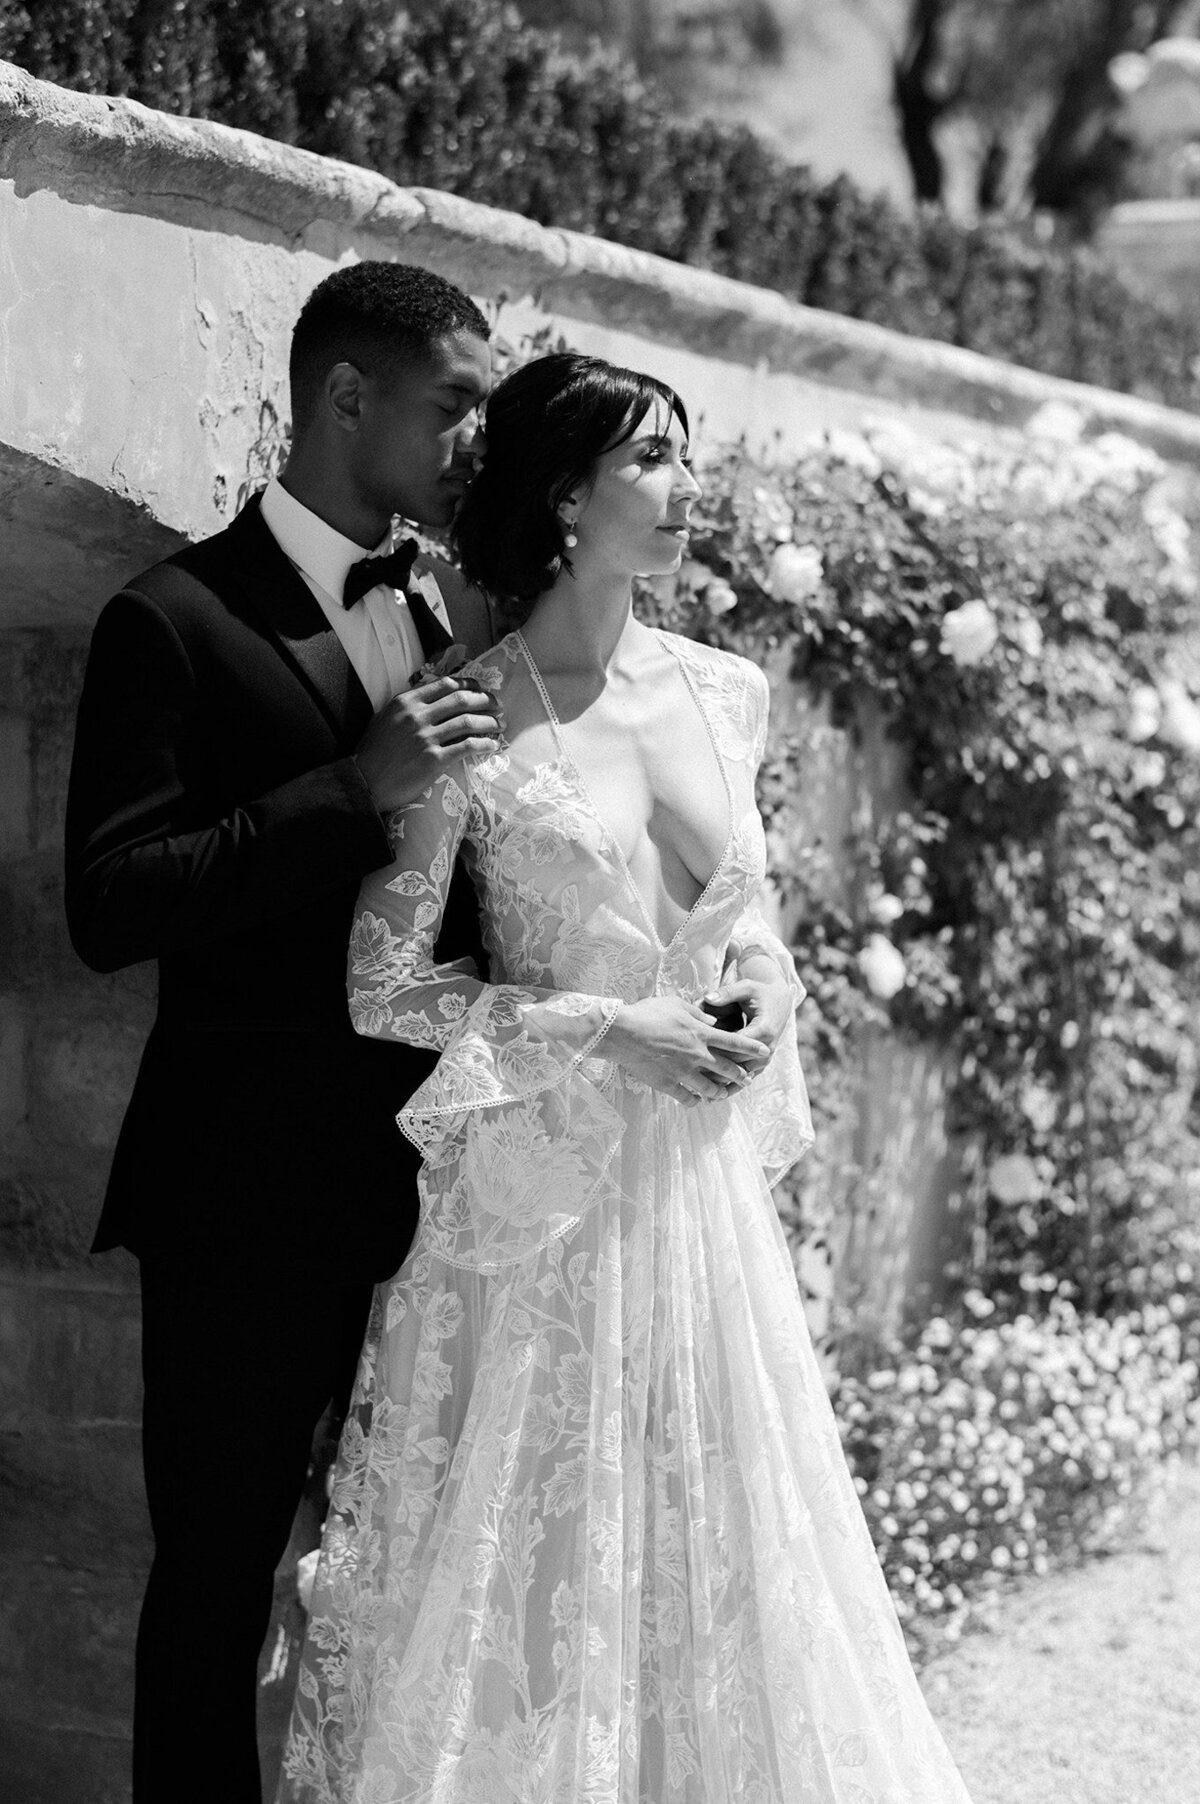 From grand celebrations to quiet exchanges, our luxury wedding photography in France portrays the genuine beauty of your love story. Our fine art lens turns fleeting moments into everlasting art.